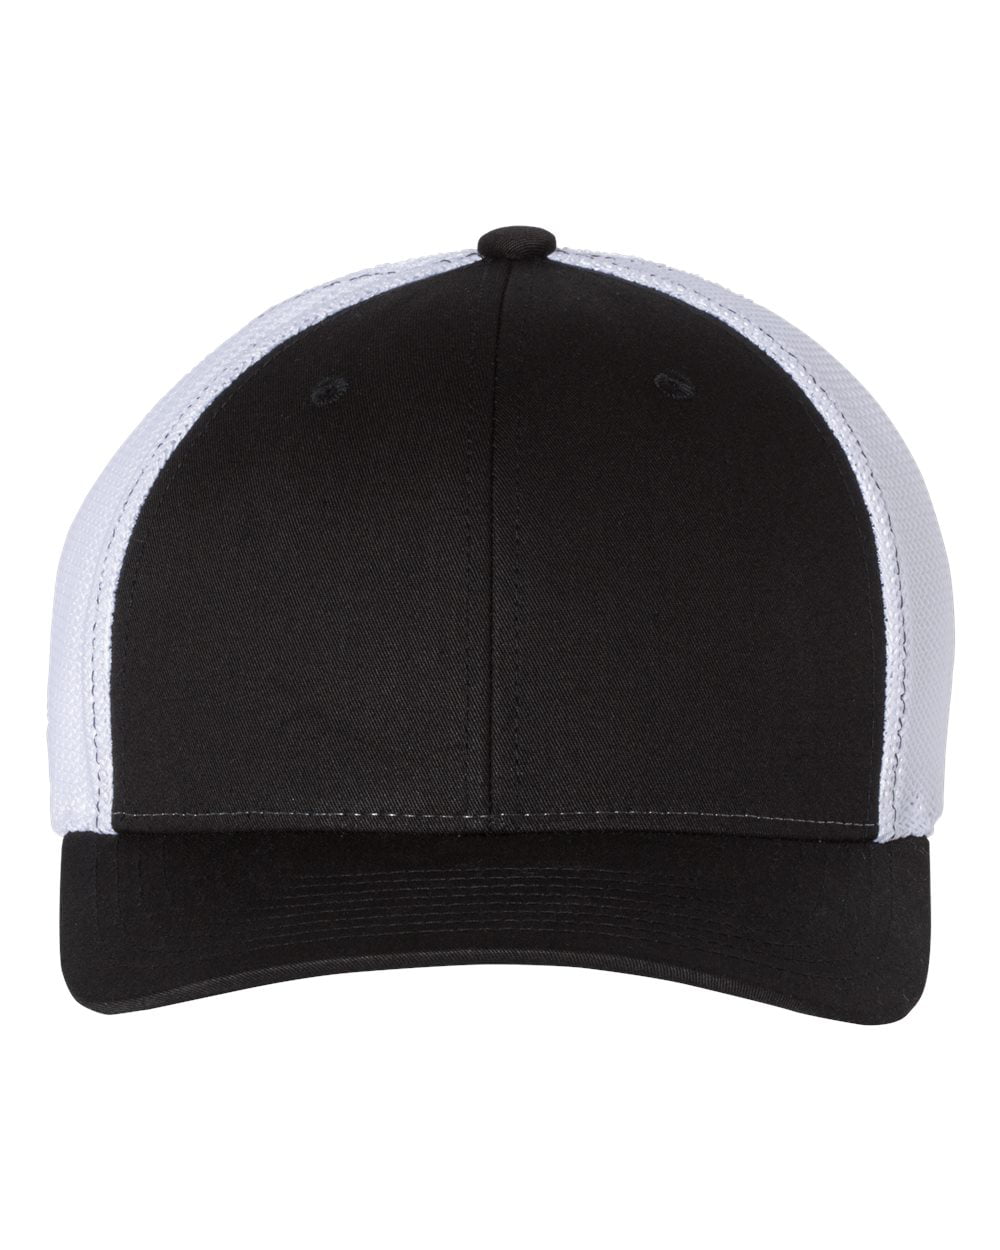 White Trucker by Richardson with / R-Flex L/XL - Fitted Black/